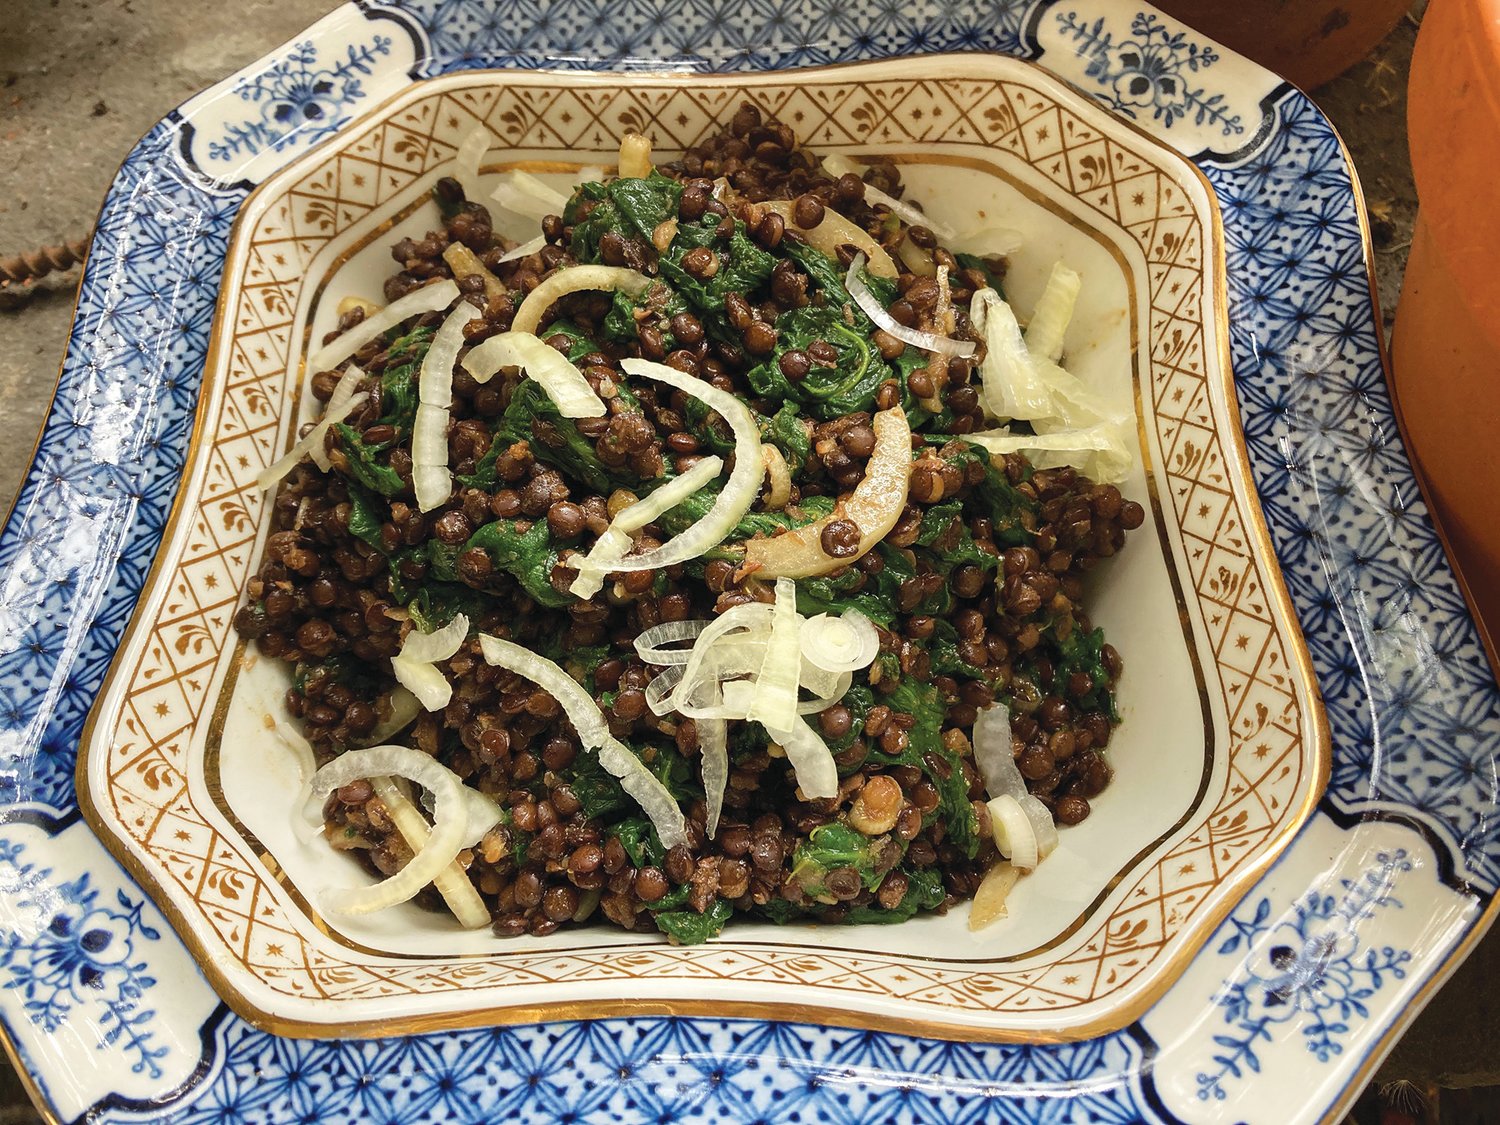 Lentils and spinach with onions and cumin vinaigrette.